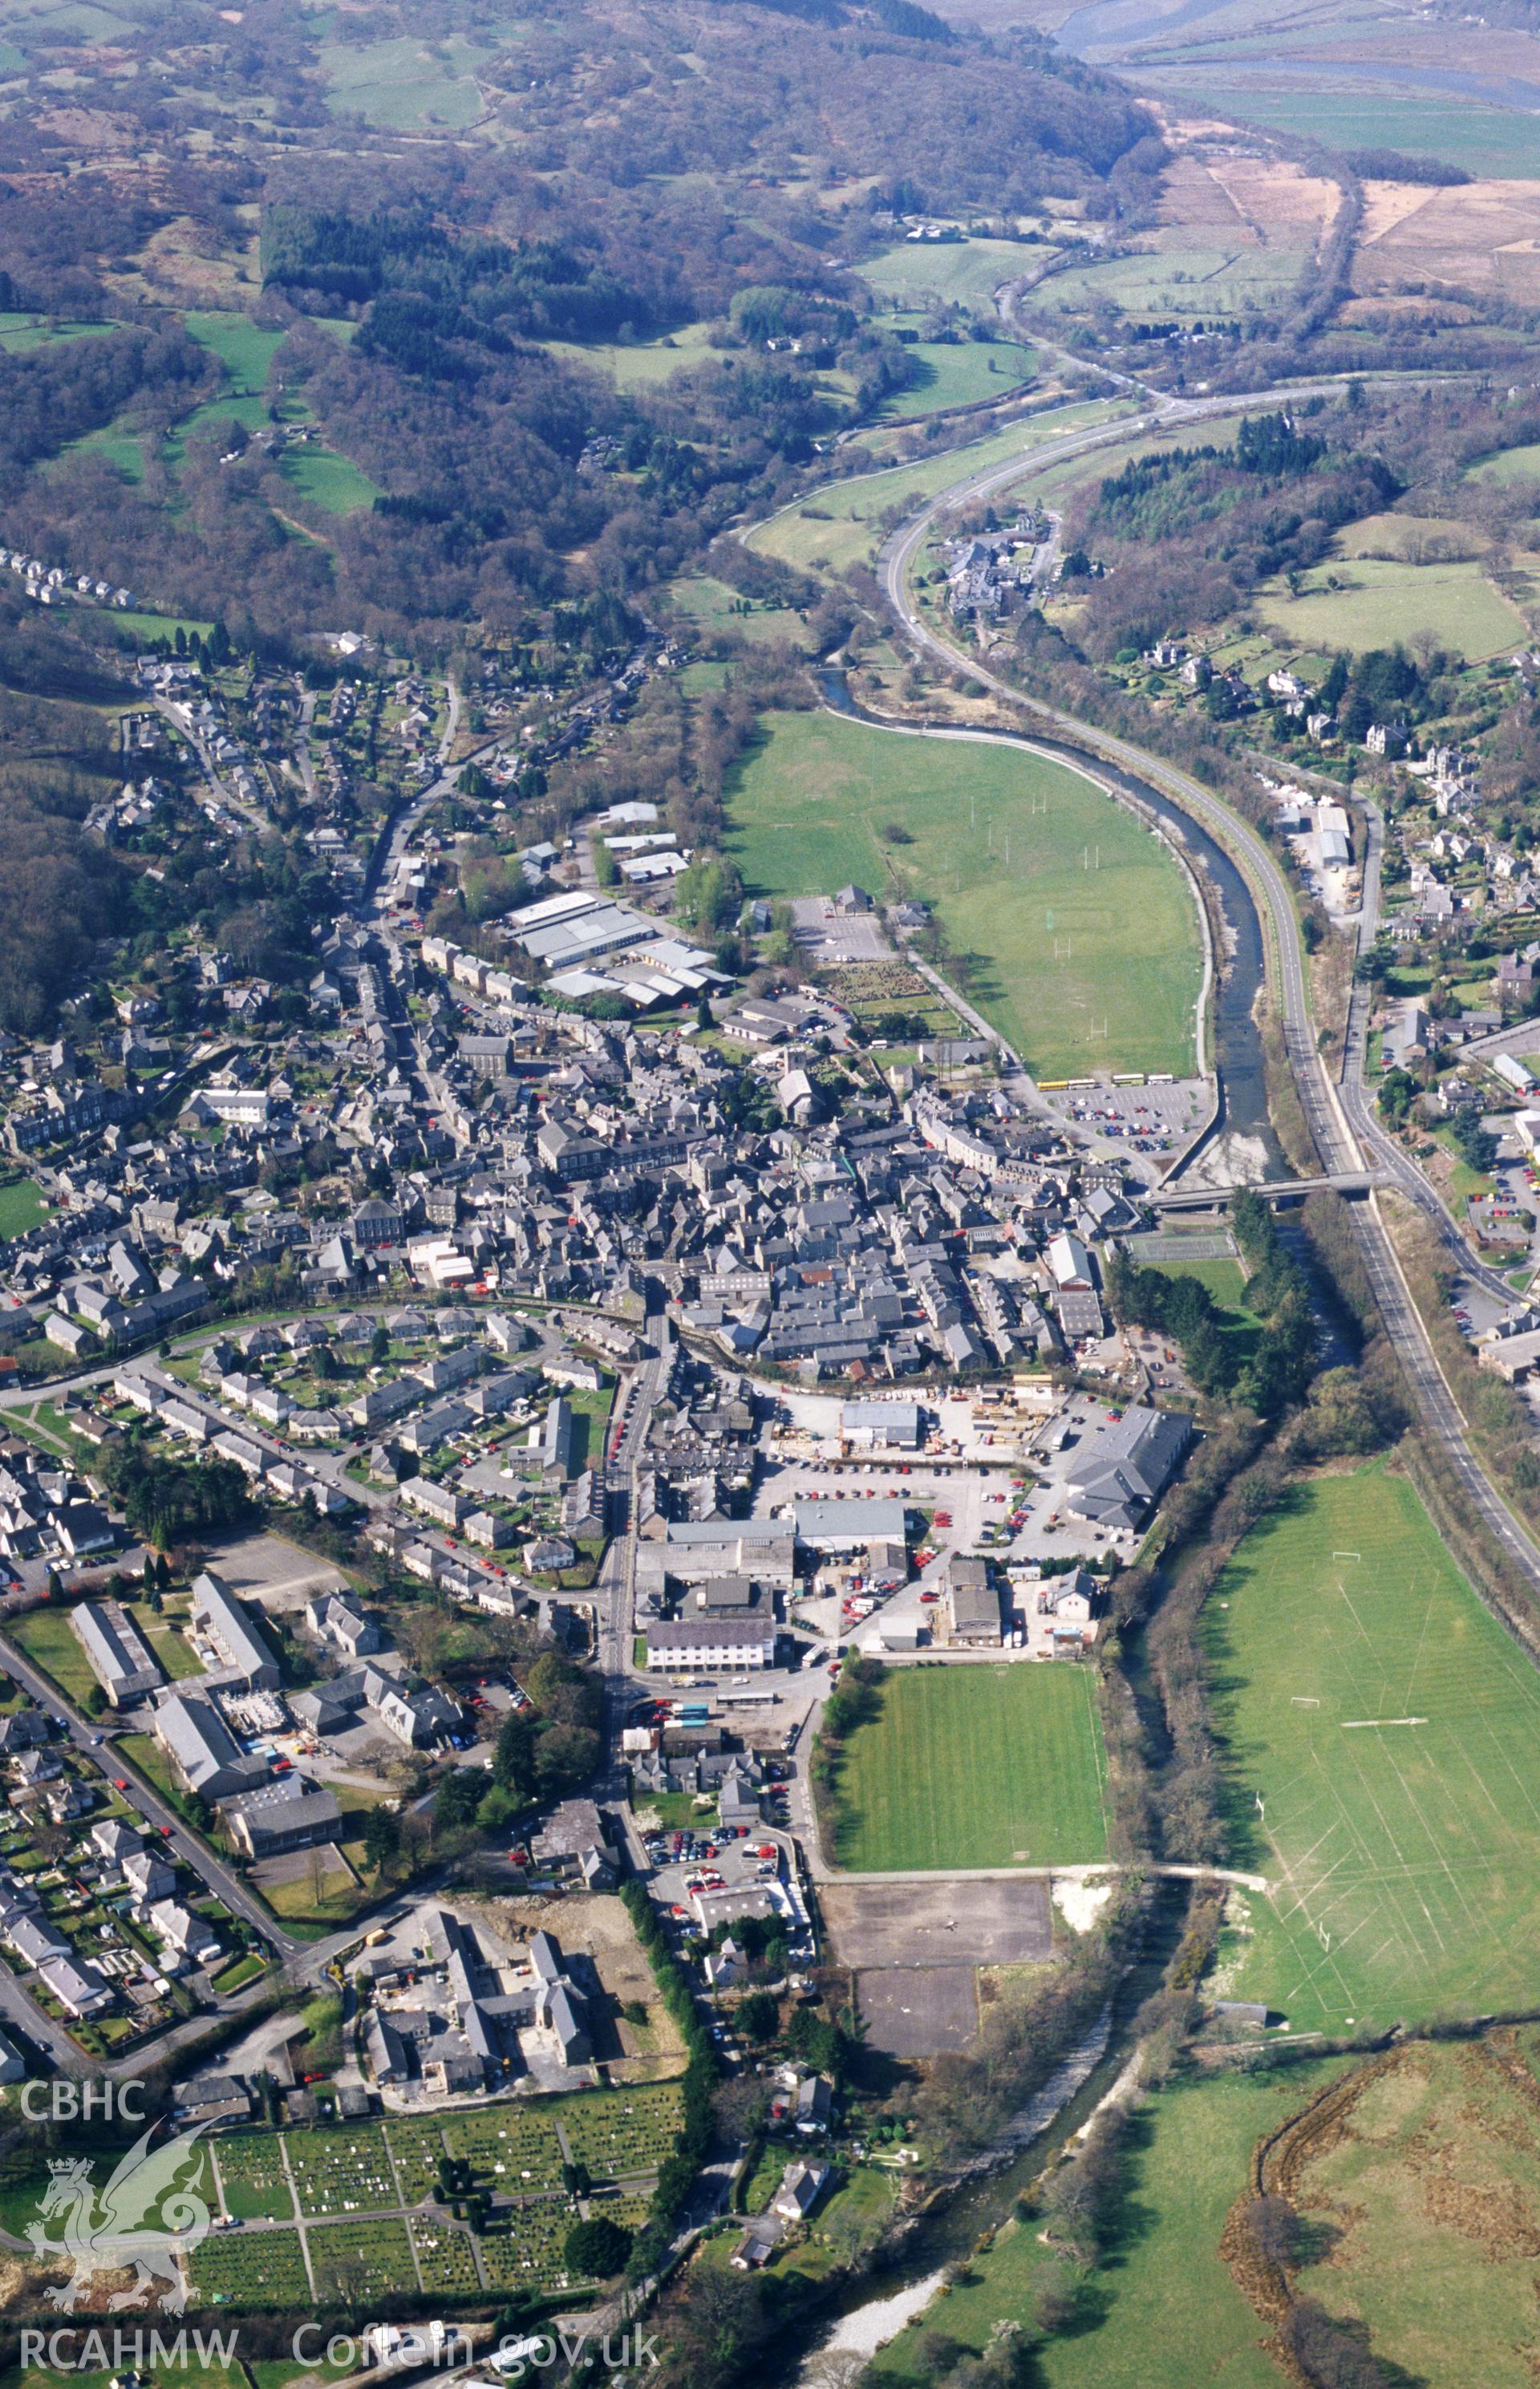 RCAHMW colour oblique aerial photograph of Dolgellau, townscape. Taken by Toby Driver on 31/03/2003